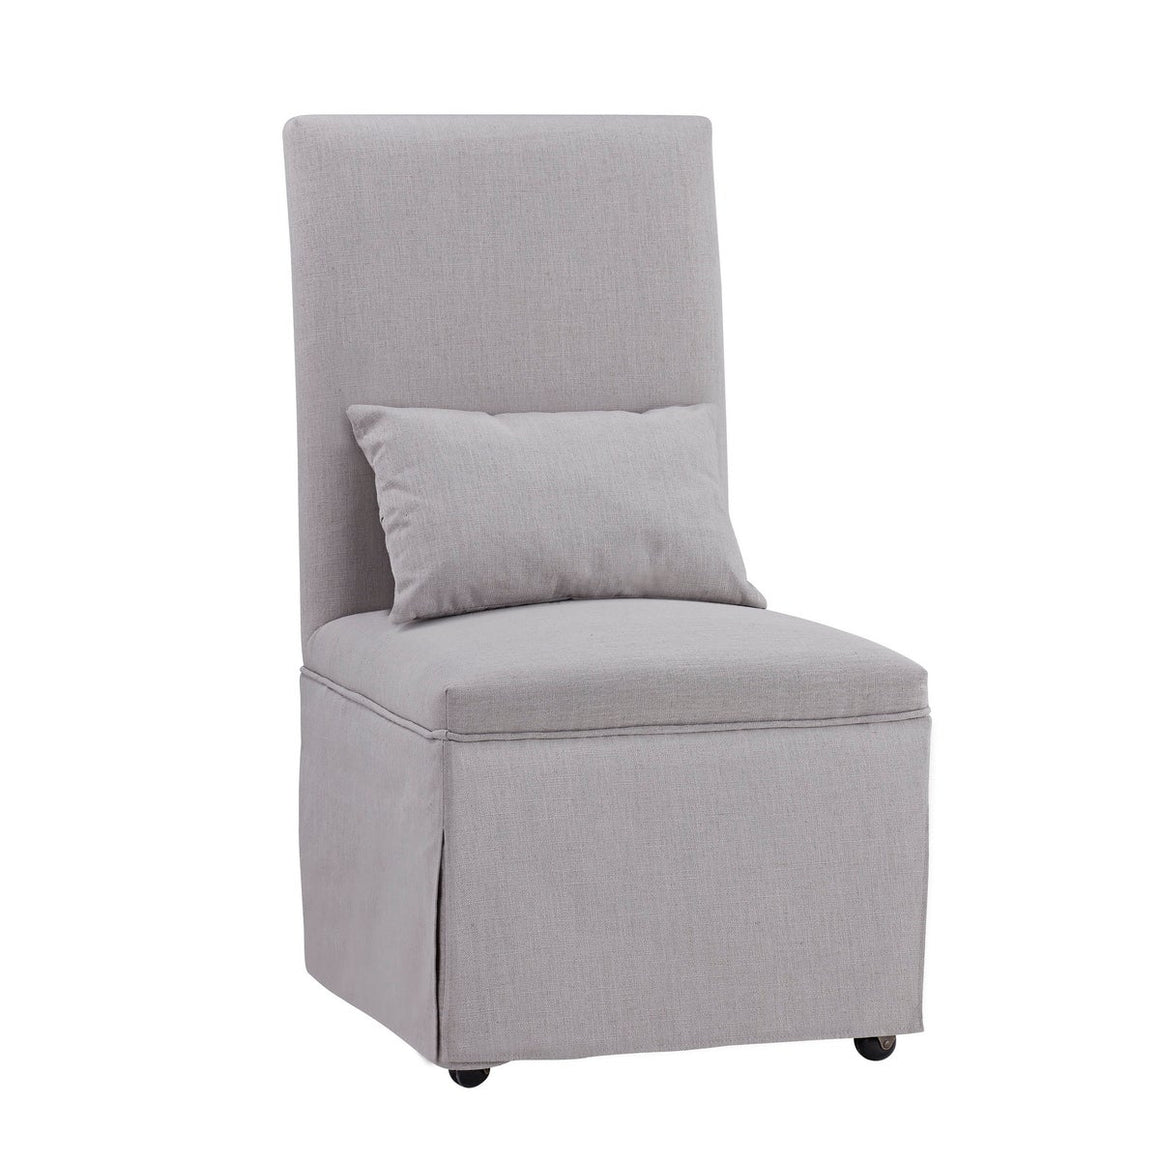 Mandy Slipcovered Side Chair - Gray